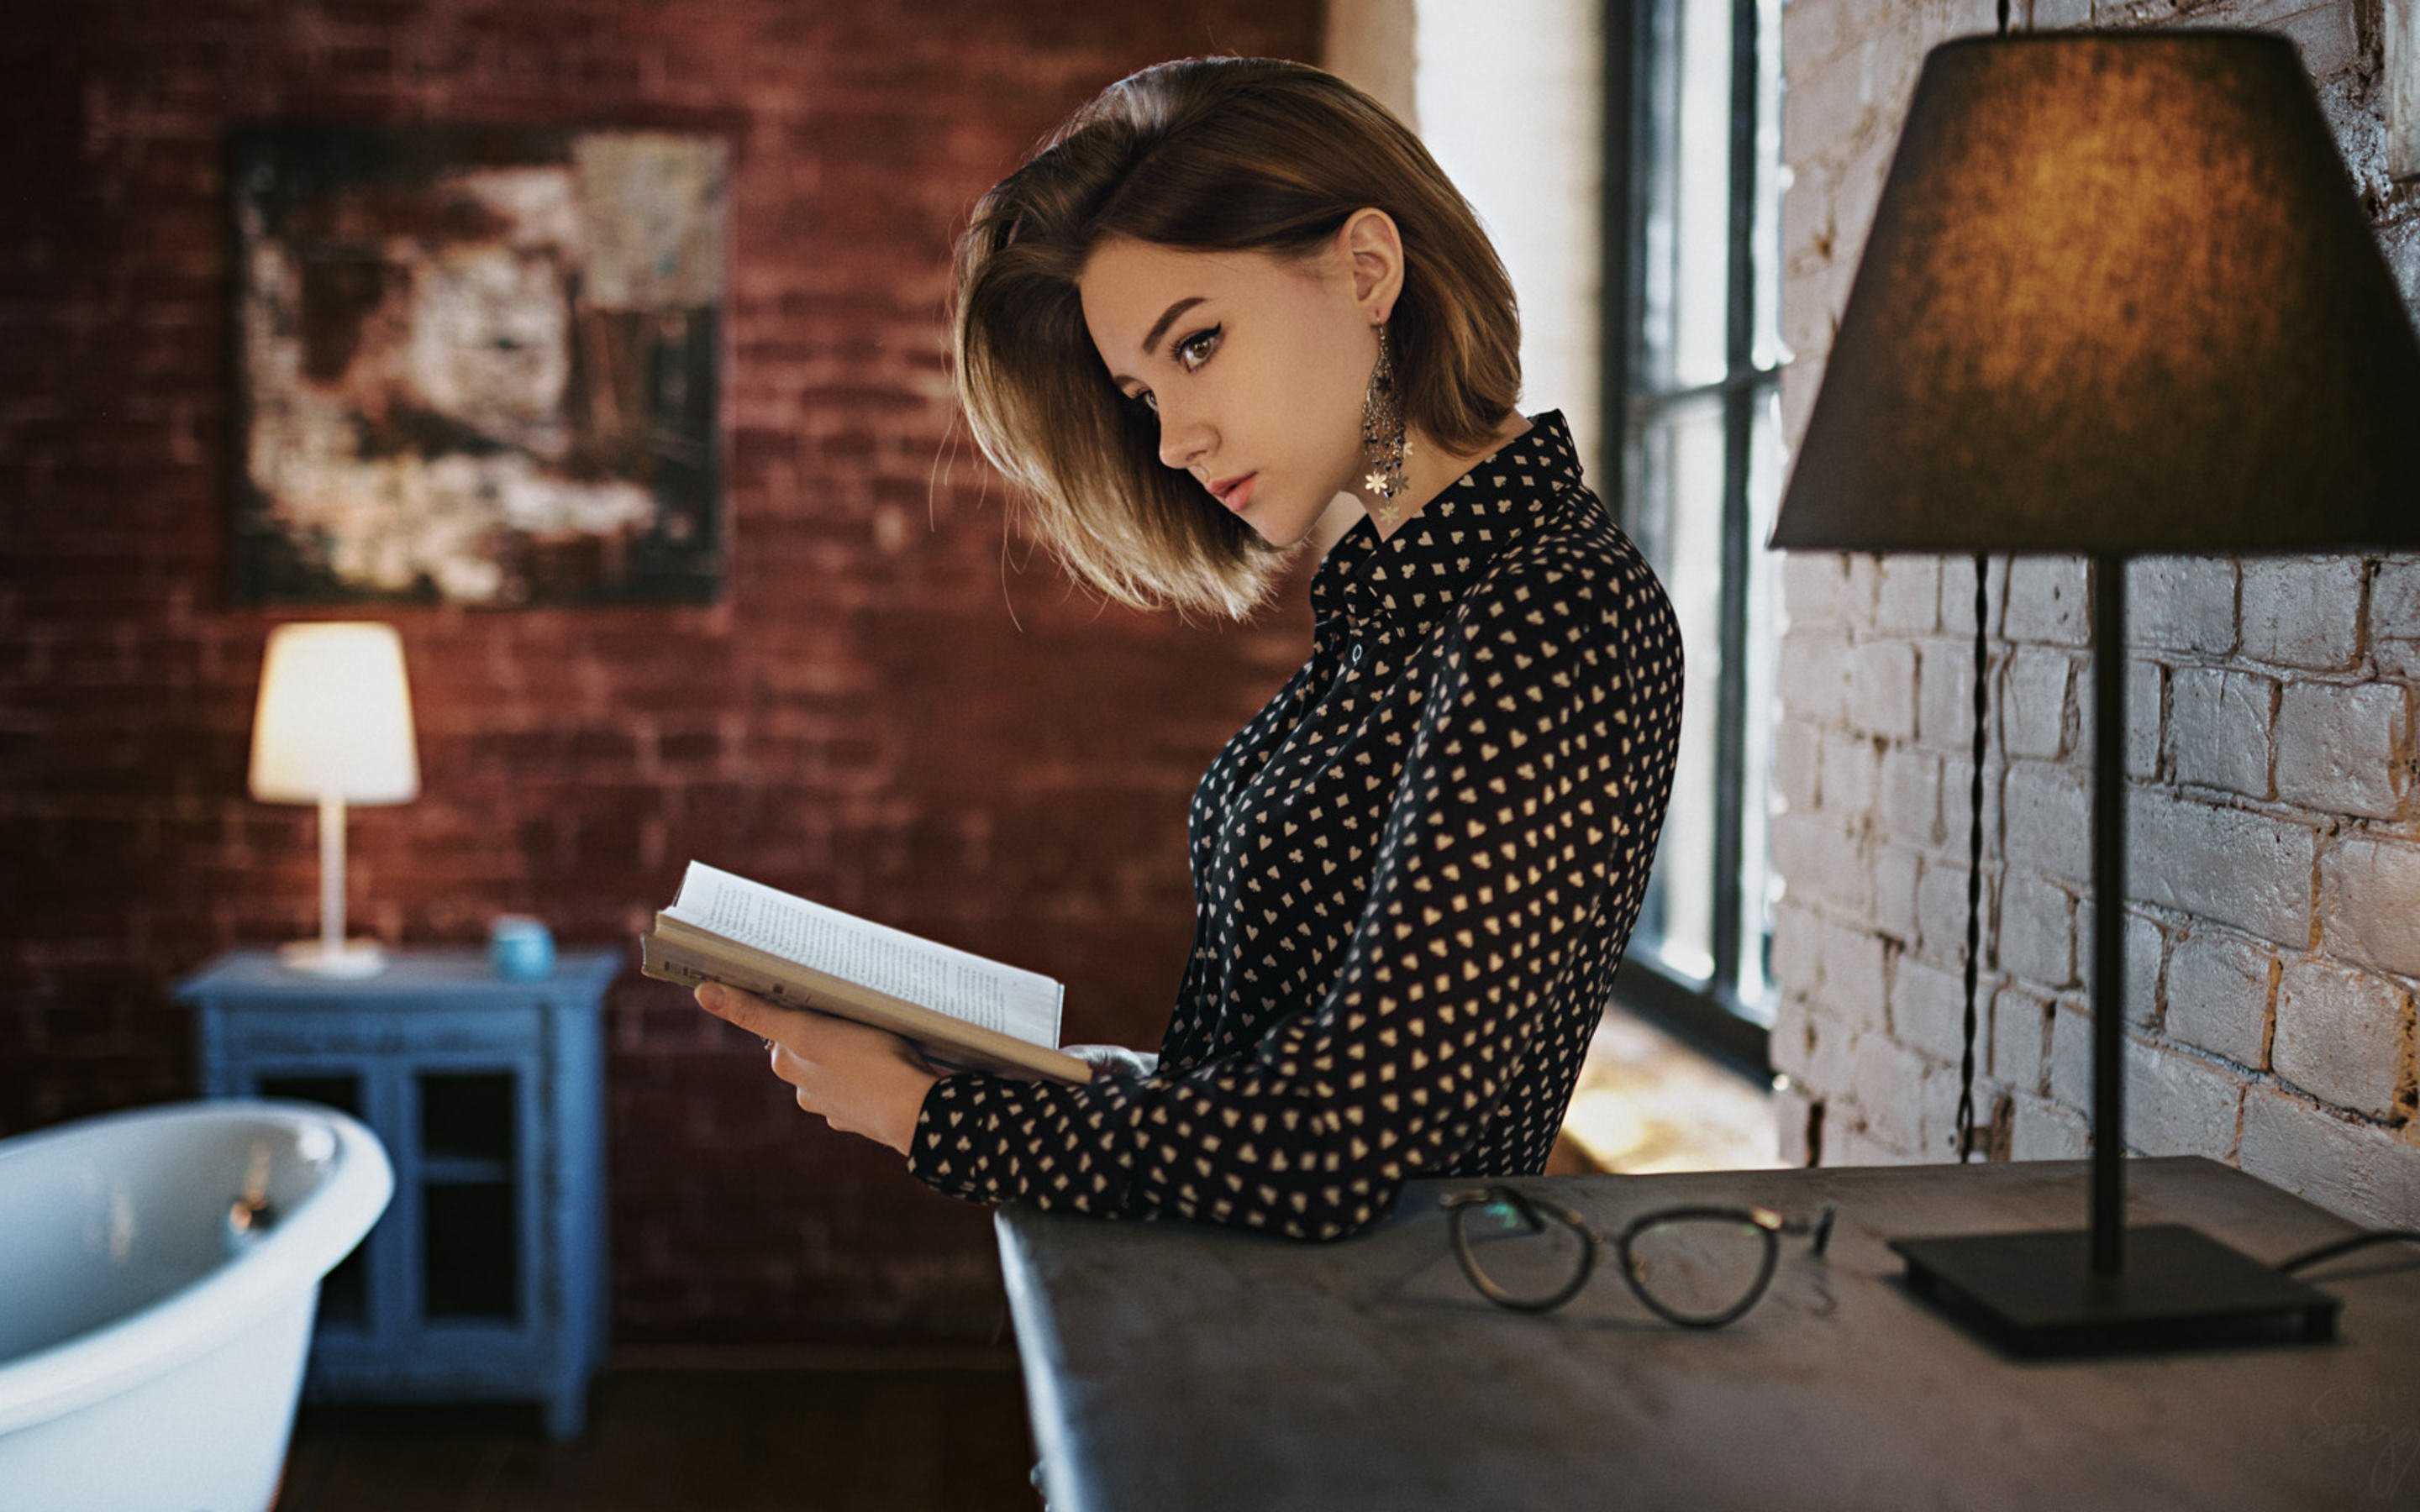 Gorgeous Girl With Book Looking Away HD Wallpaper (2880x1800)